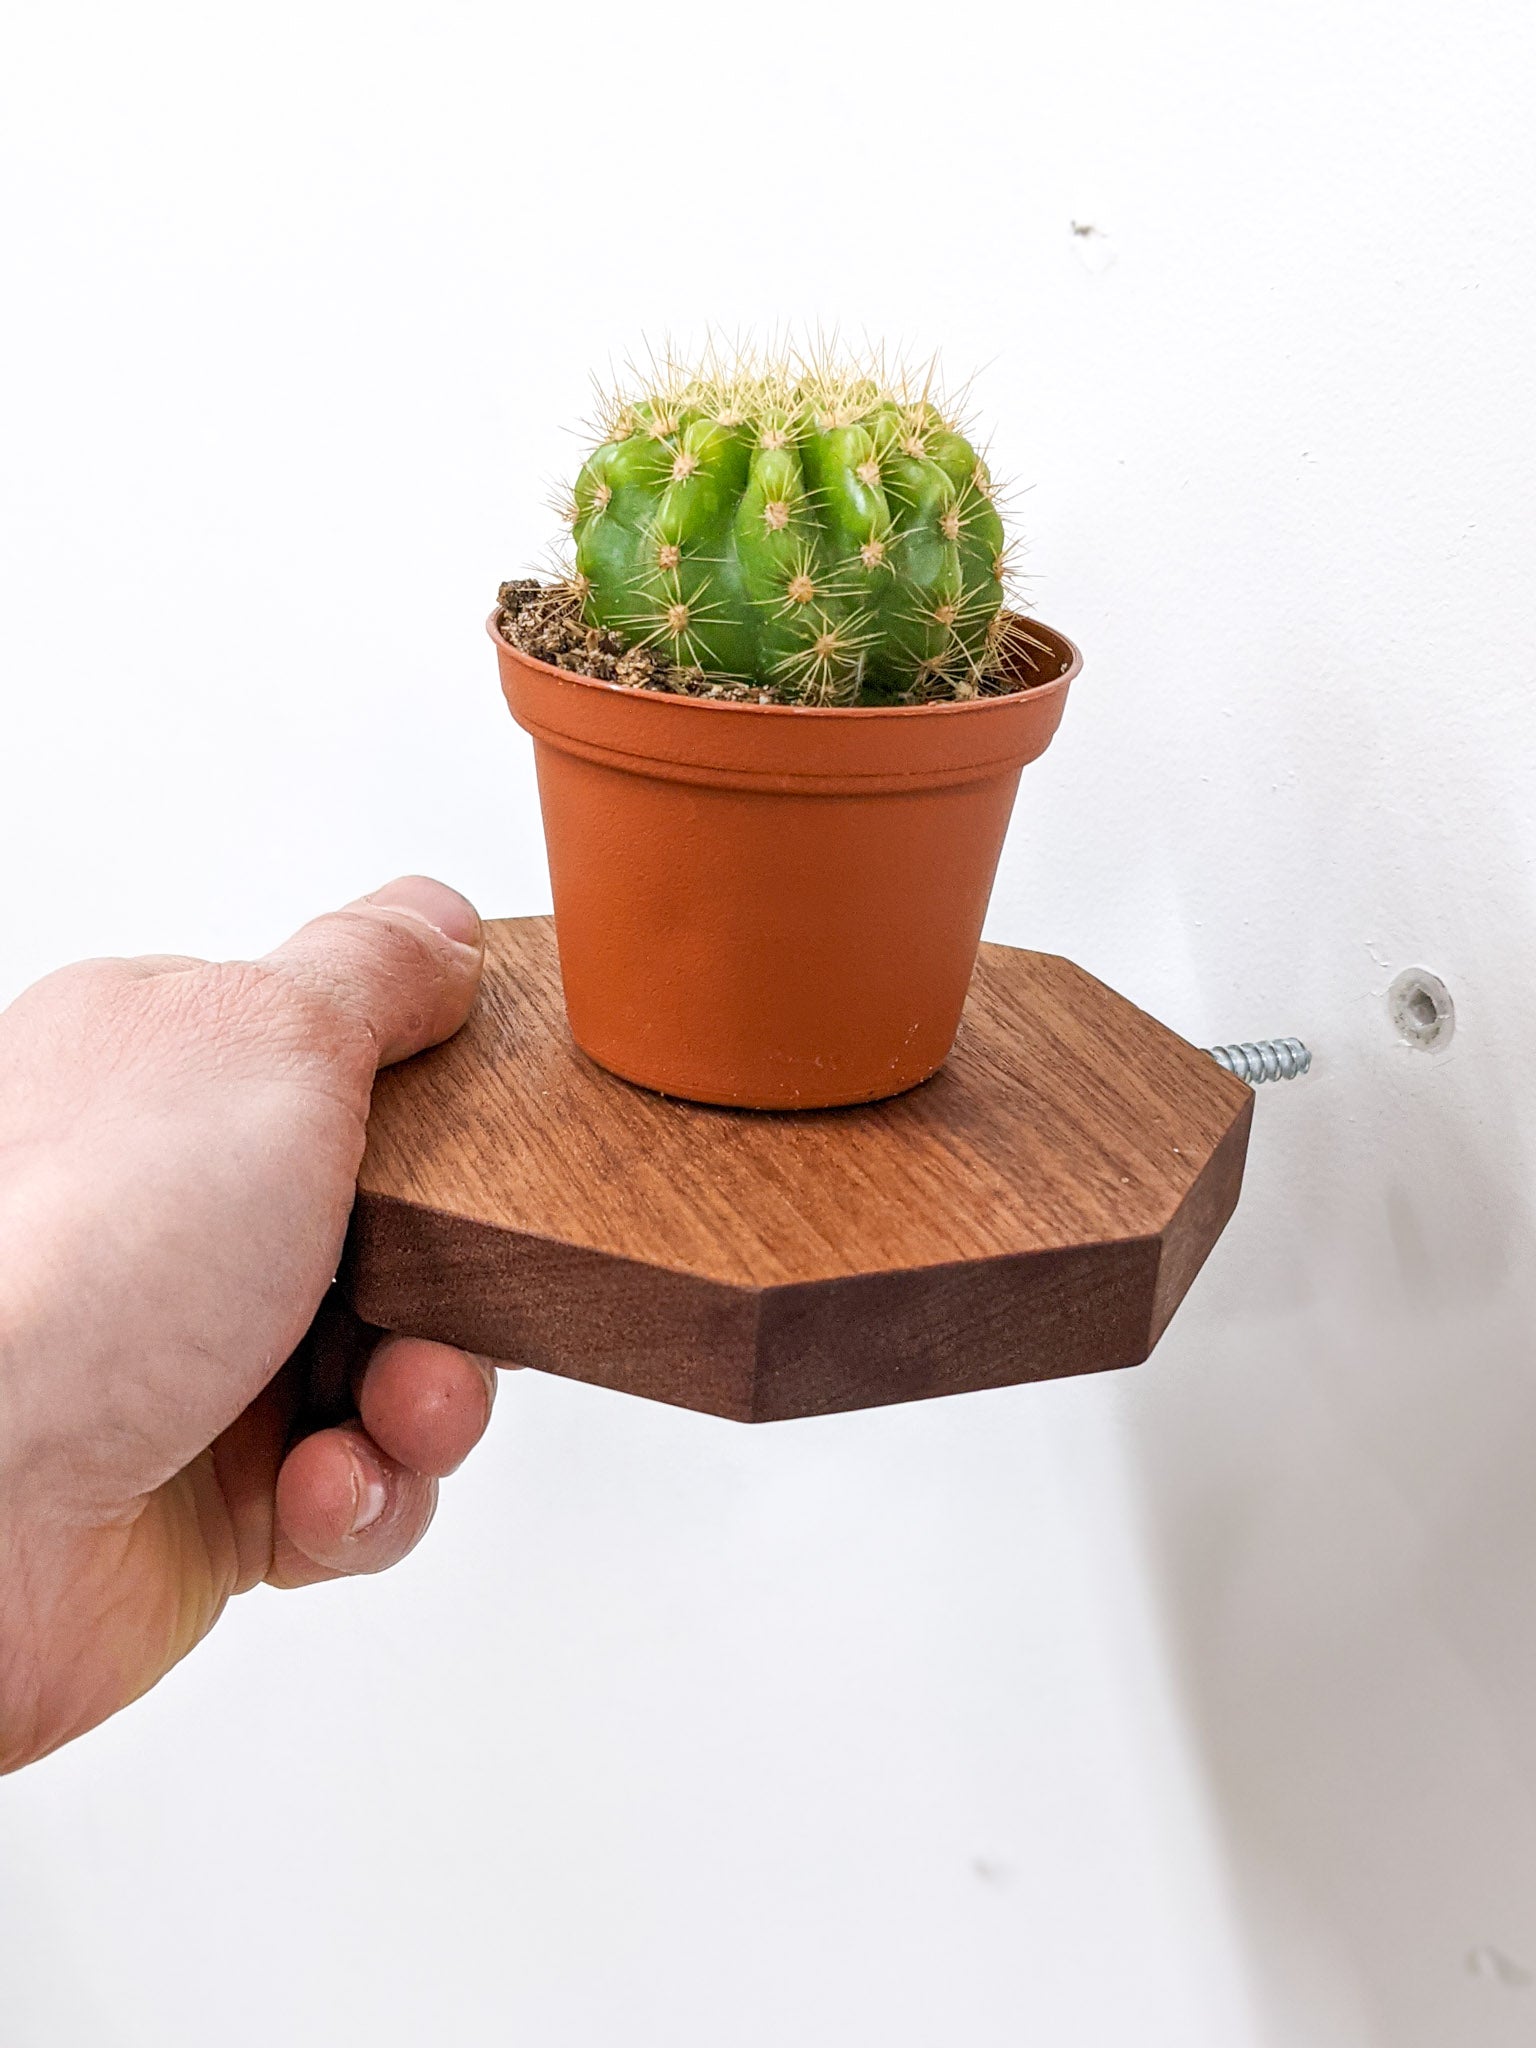 A hand begins to easily install a mahogany octagon floating shelf  by screwing the shelf into a drilled hole on the wall. A potted round mini cactus sits on the shelf.